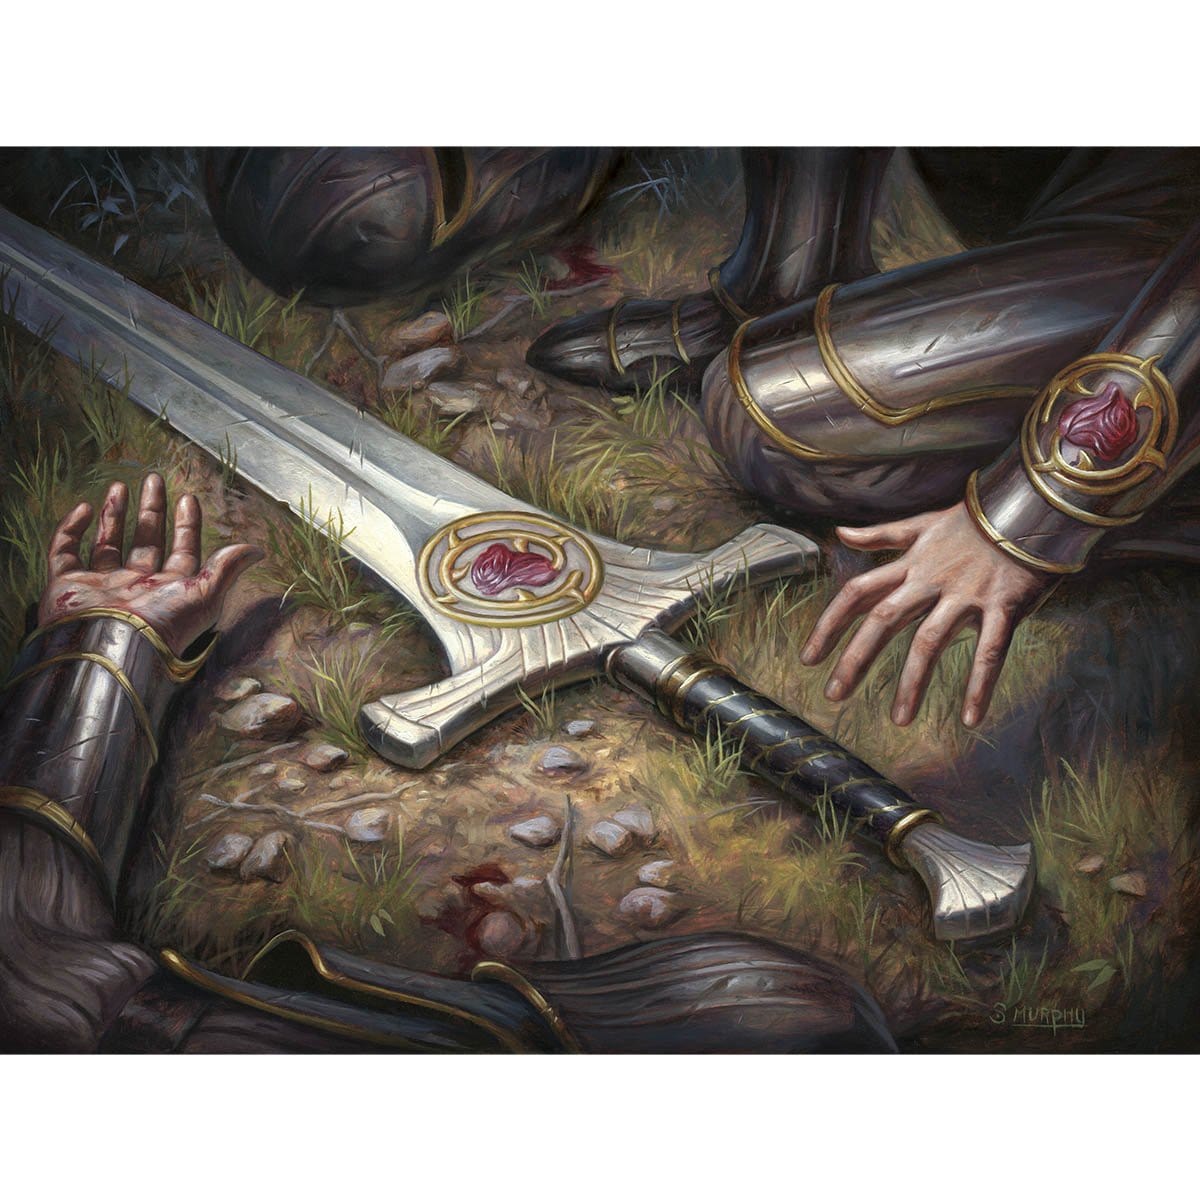 Forebear's Blade Print - Print - Original Magic Art - Accessories for Magic the Gathering and other card games